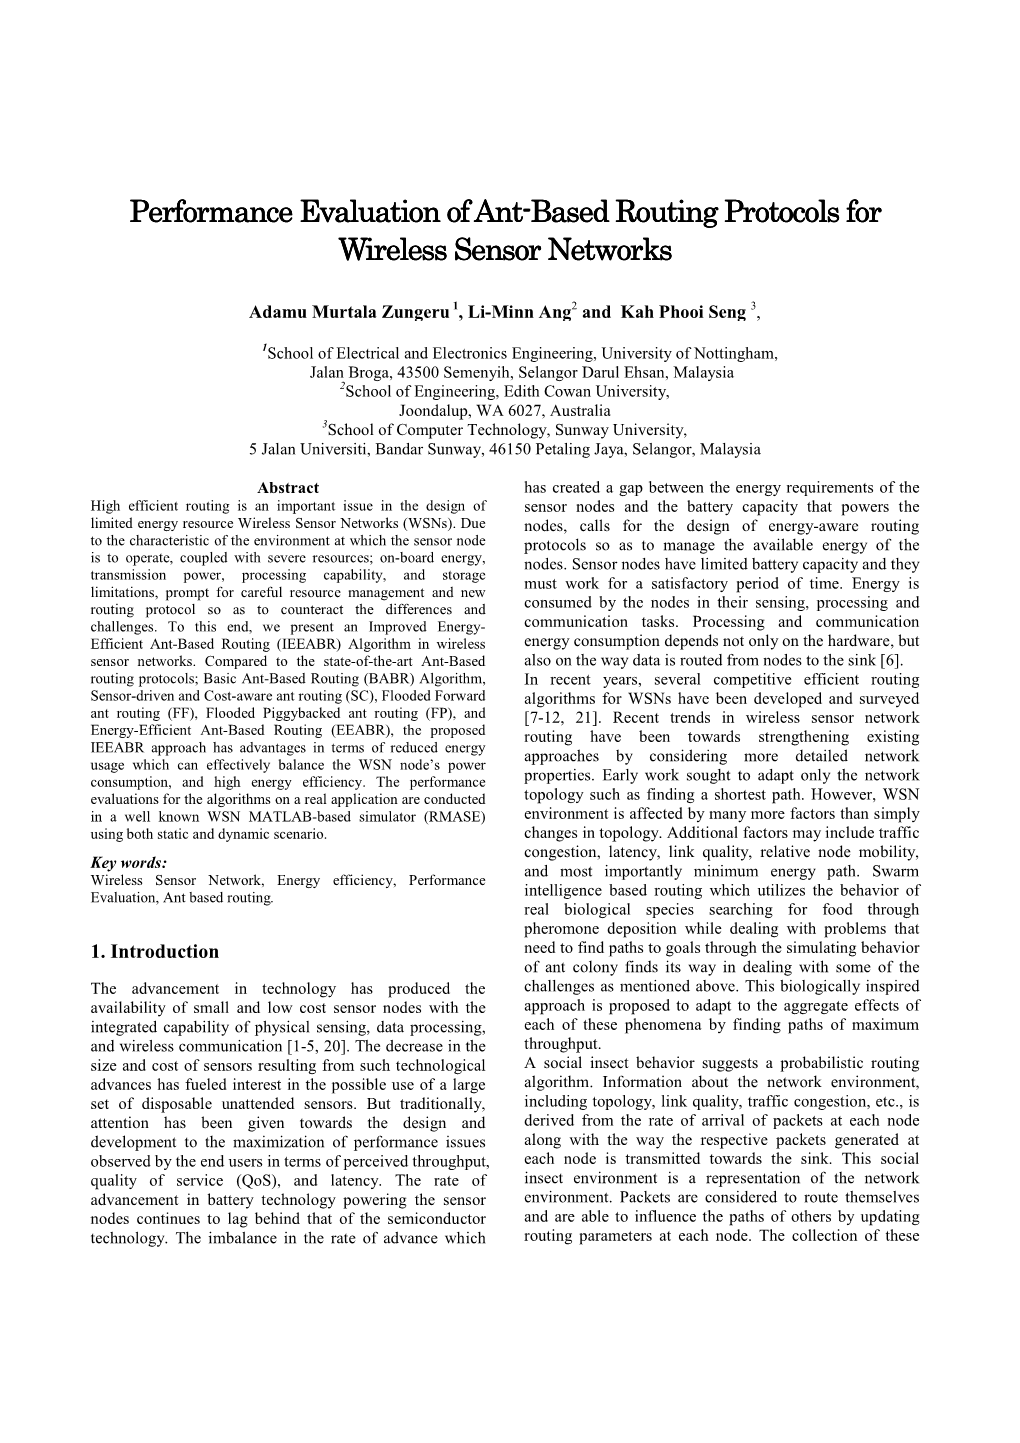 Performance Evaluation of Ant-Based Routing Protocols for Wireless